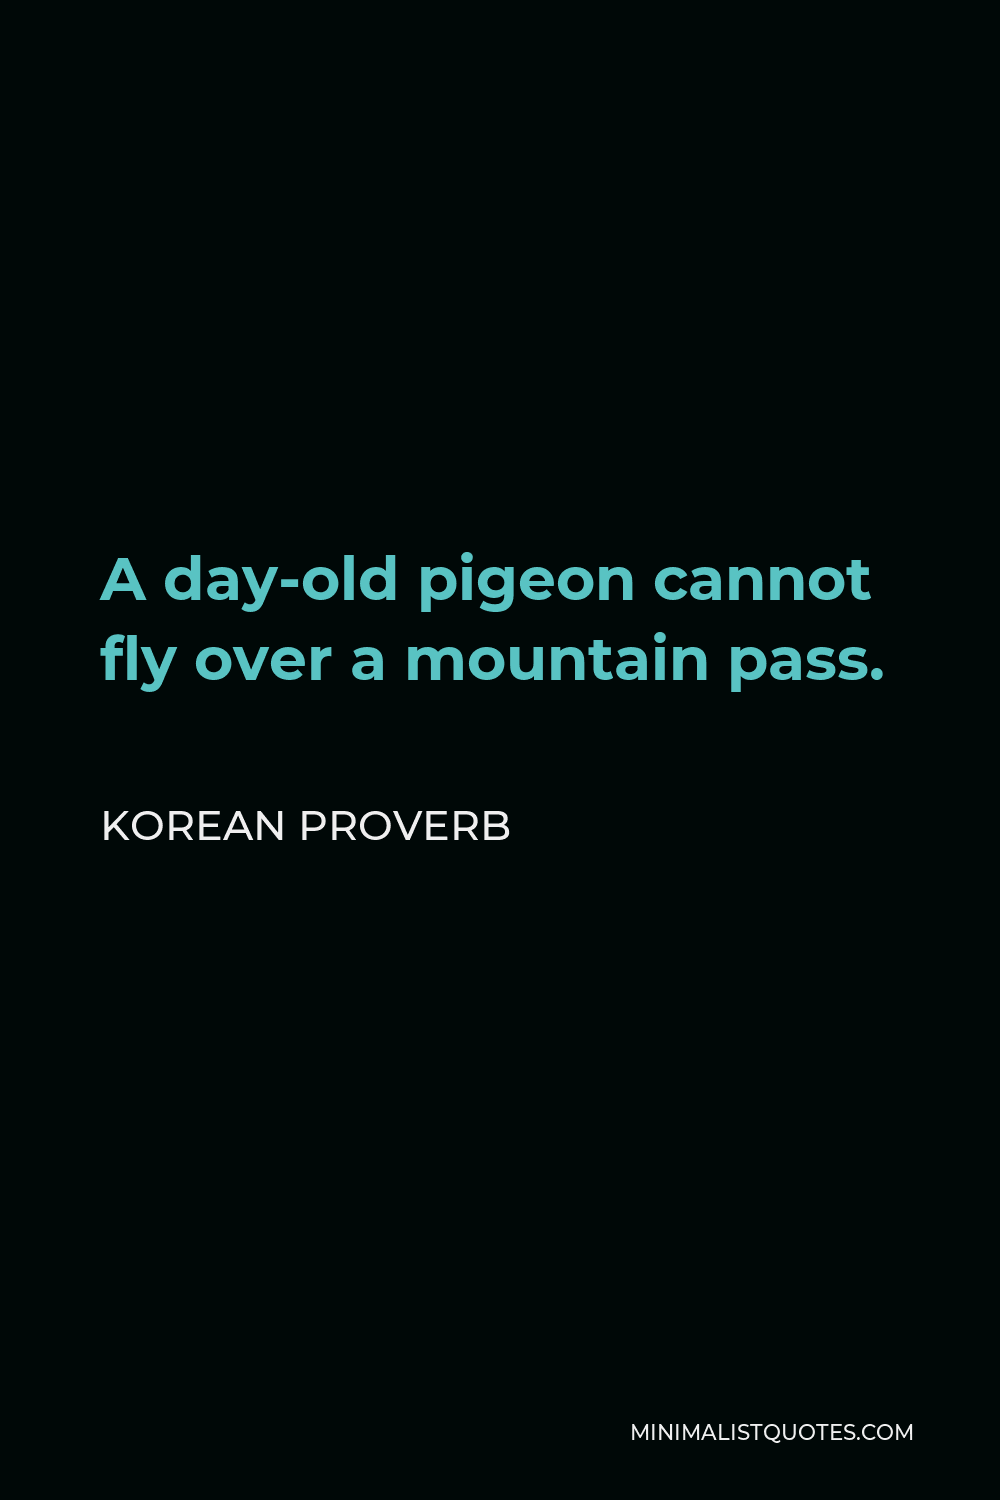 Korean Proverb Quote - A day-old pigeon cannot fly over a mountain pass.